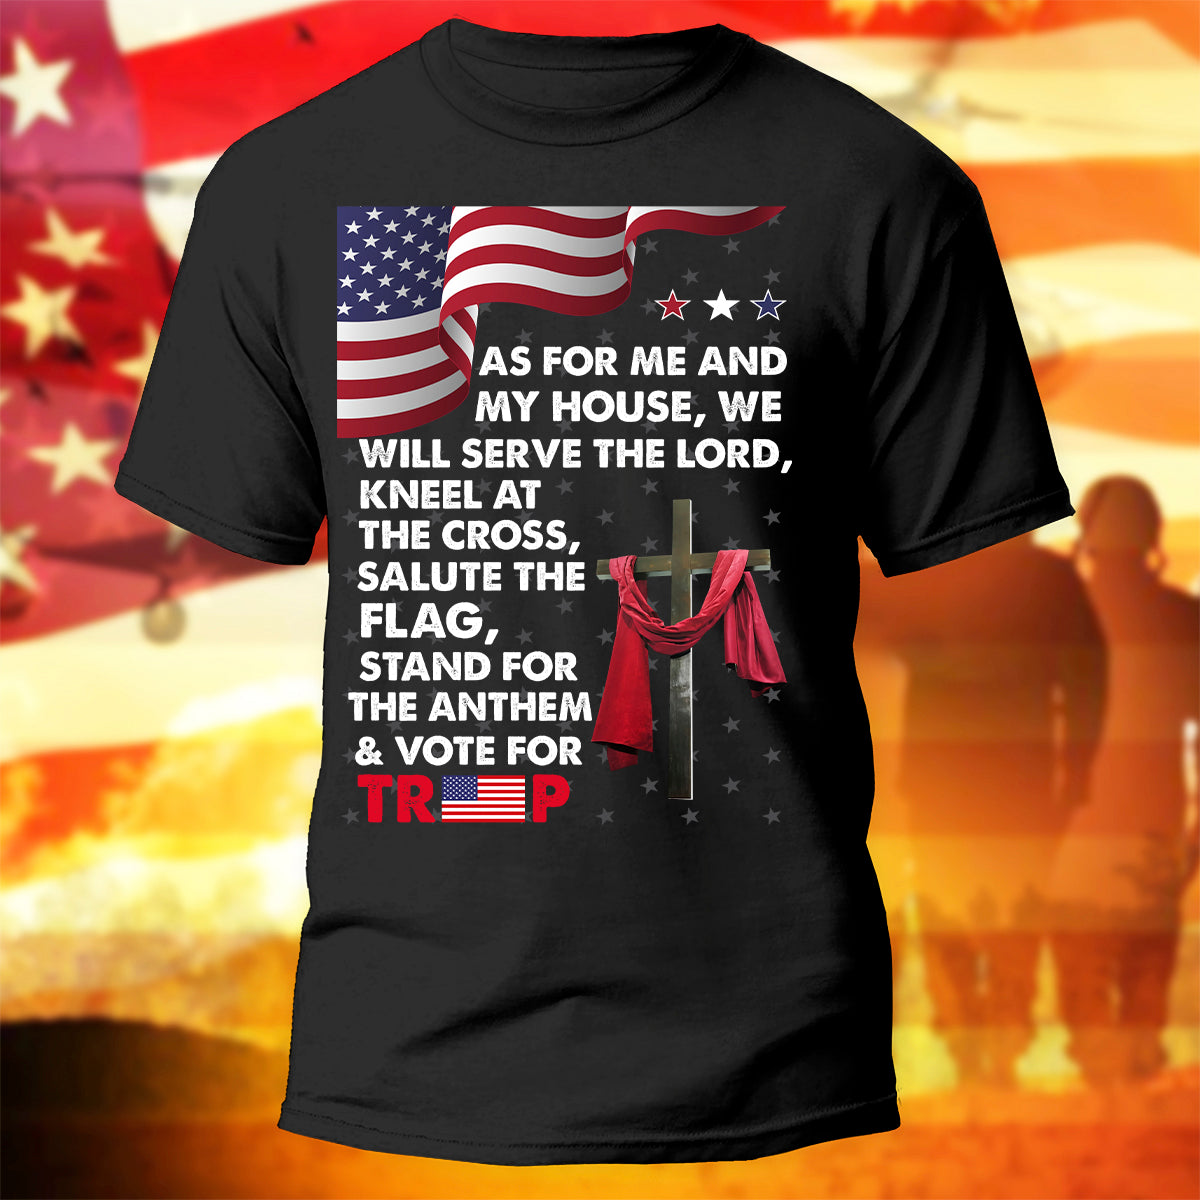 Stand For The Anthem T-Shirt As For Me And My House Shirt Patriotic Gift